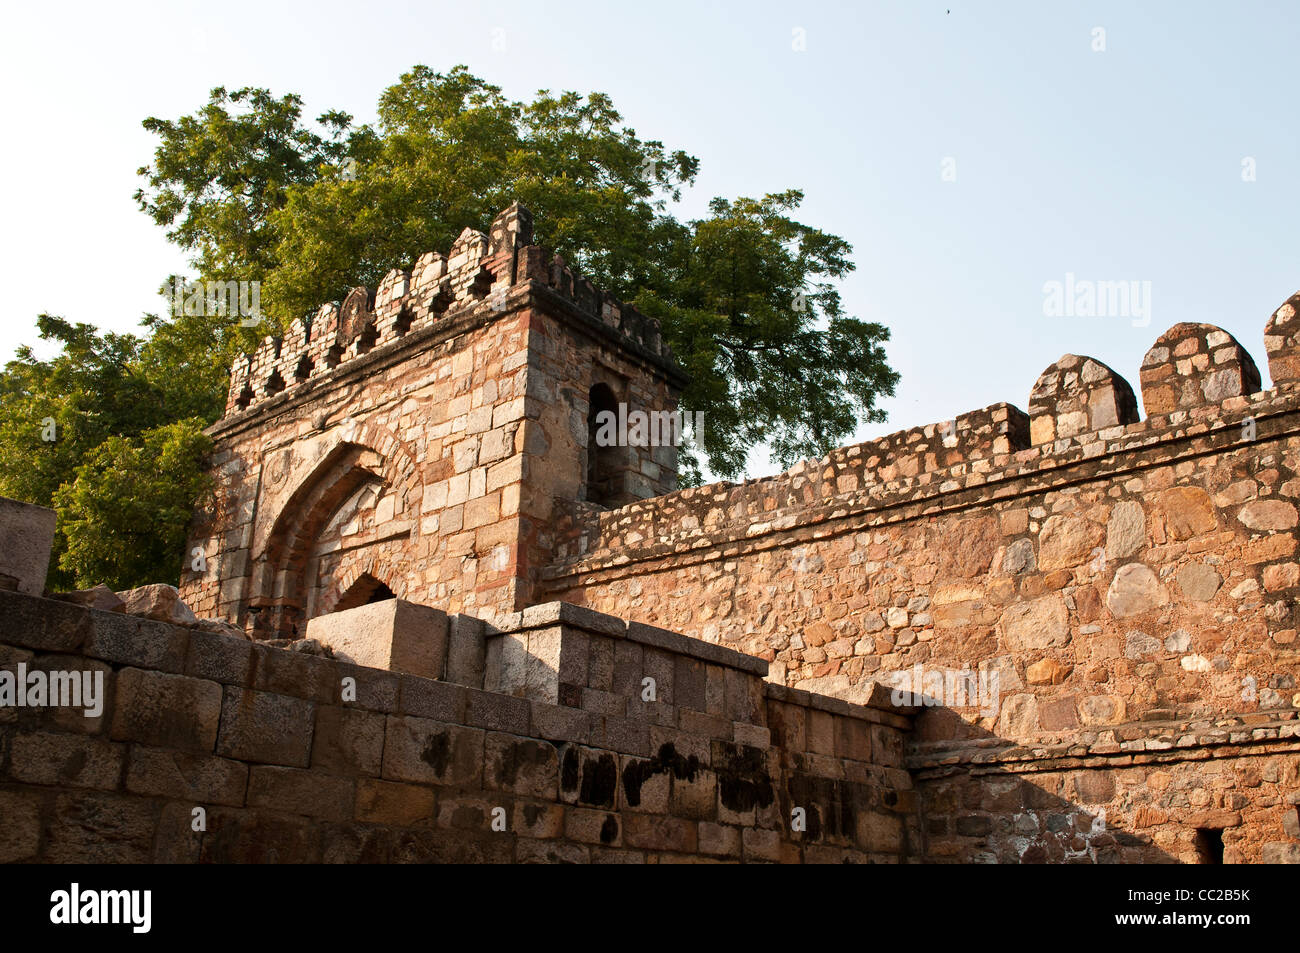 Outer wall and entrance of Tomb of Sikandar Lodi, Lodi Gardens, New Delhi, India Stock Photo